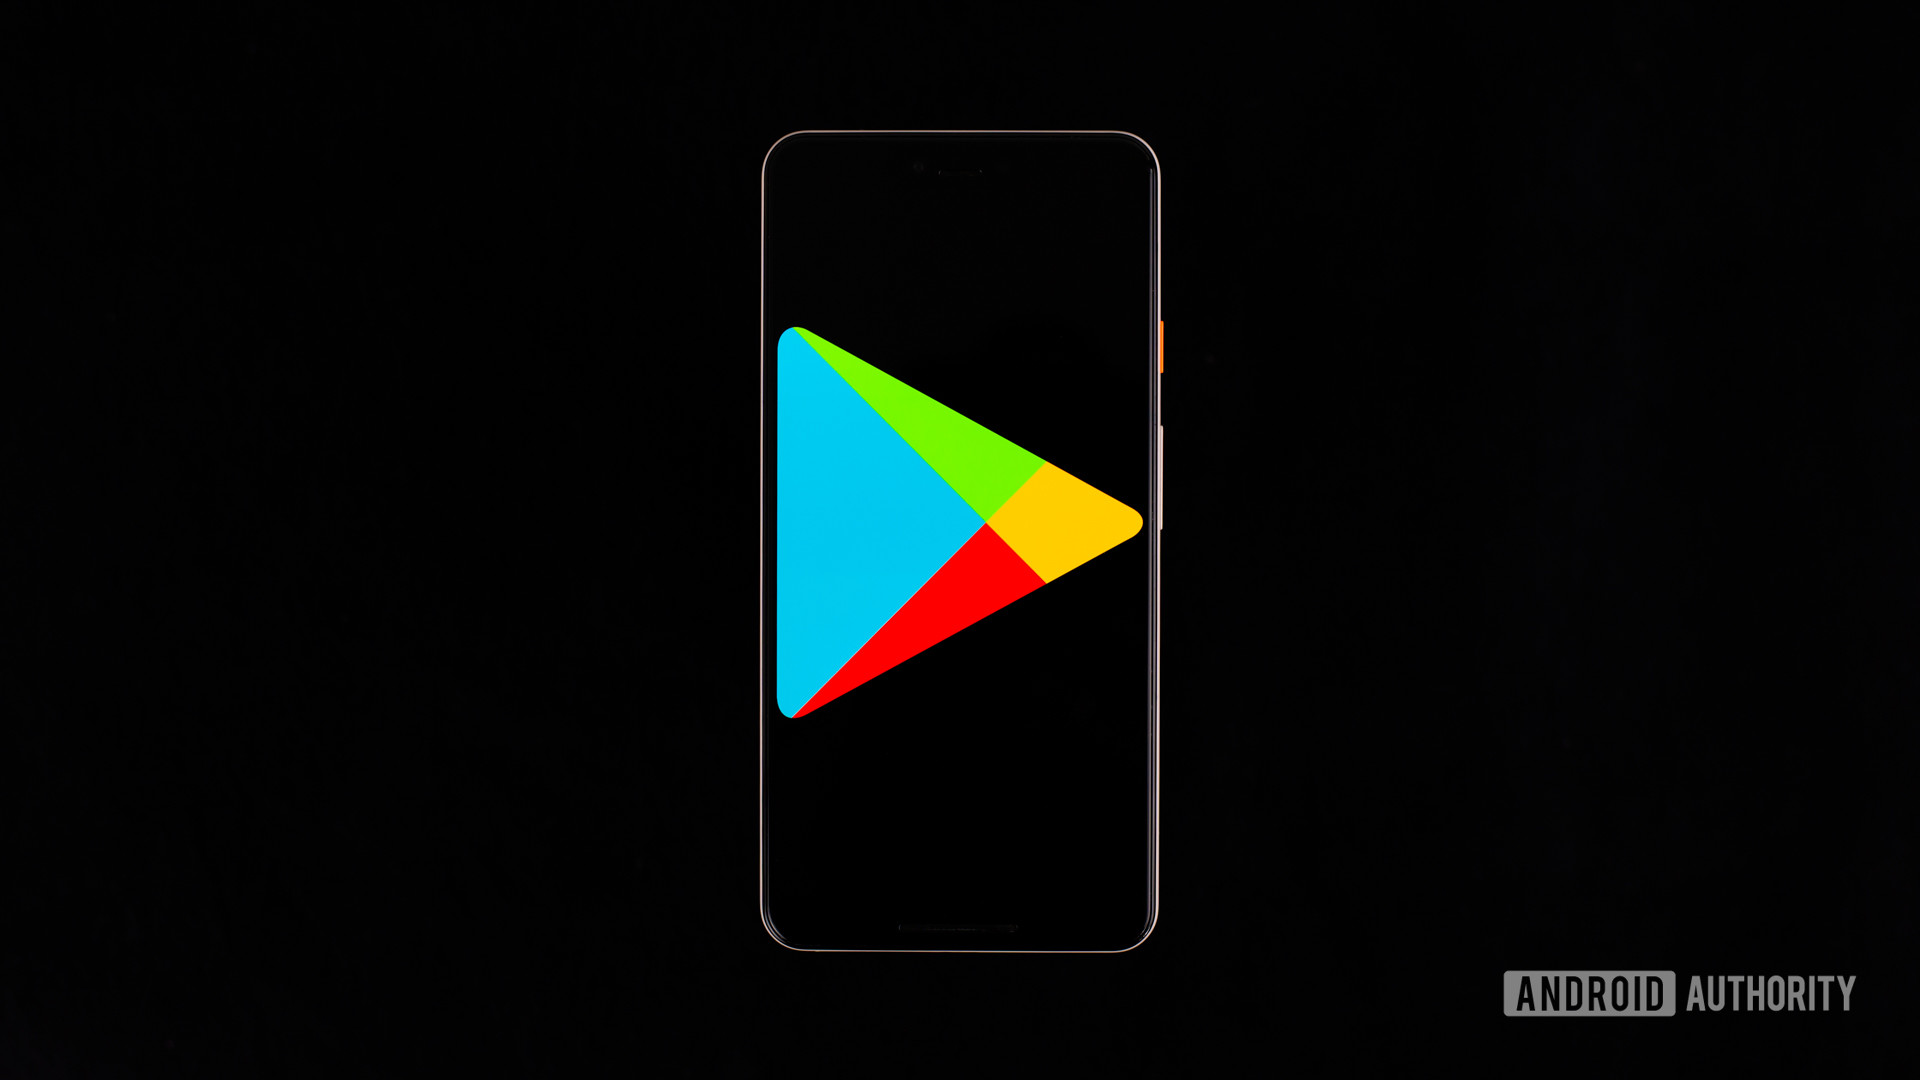 The Google Play Store logo on smartphone stock photo.